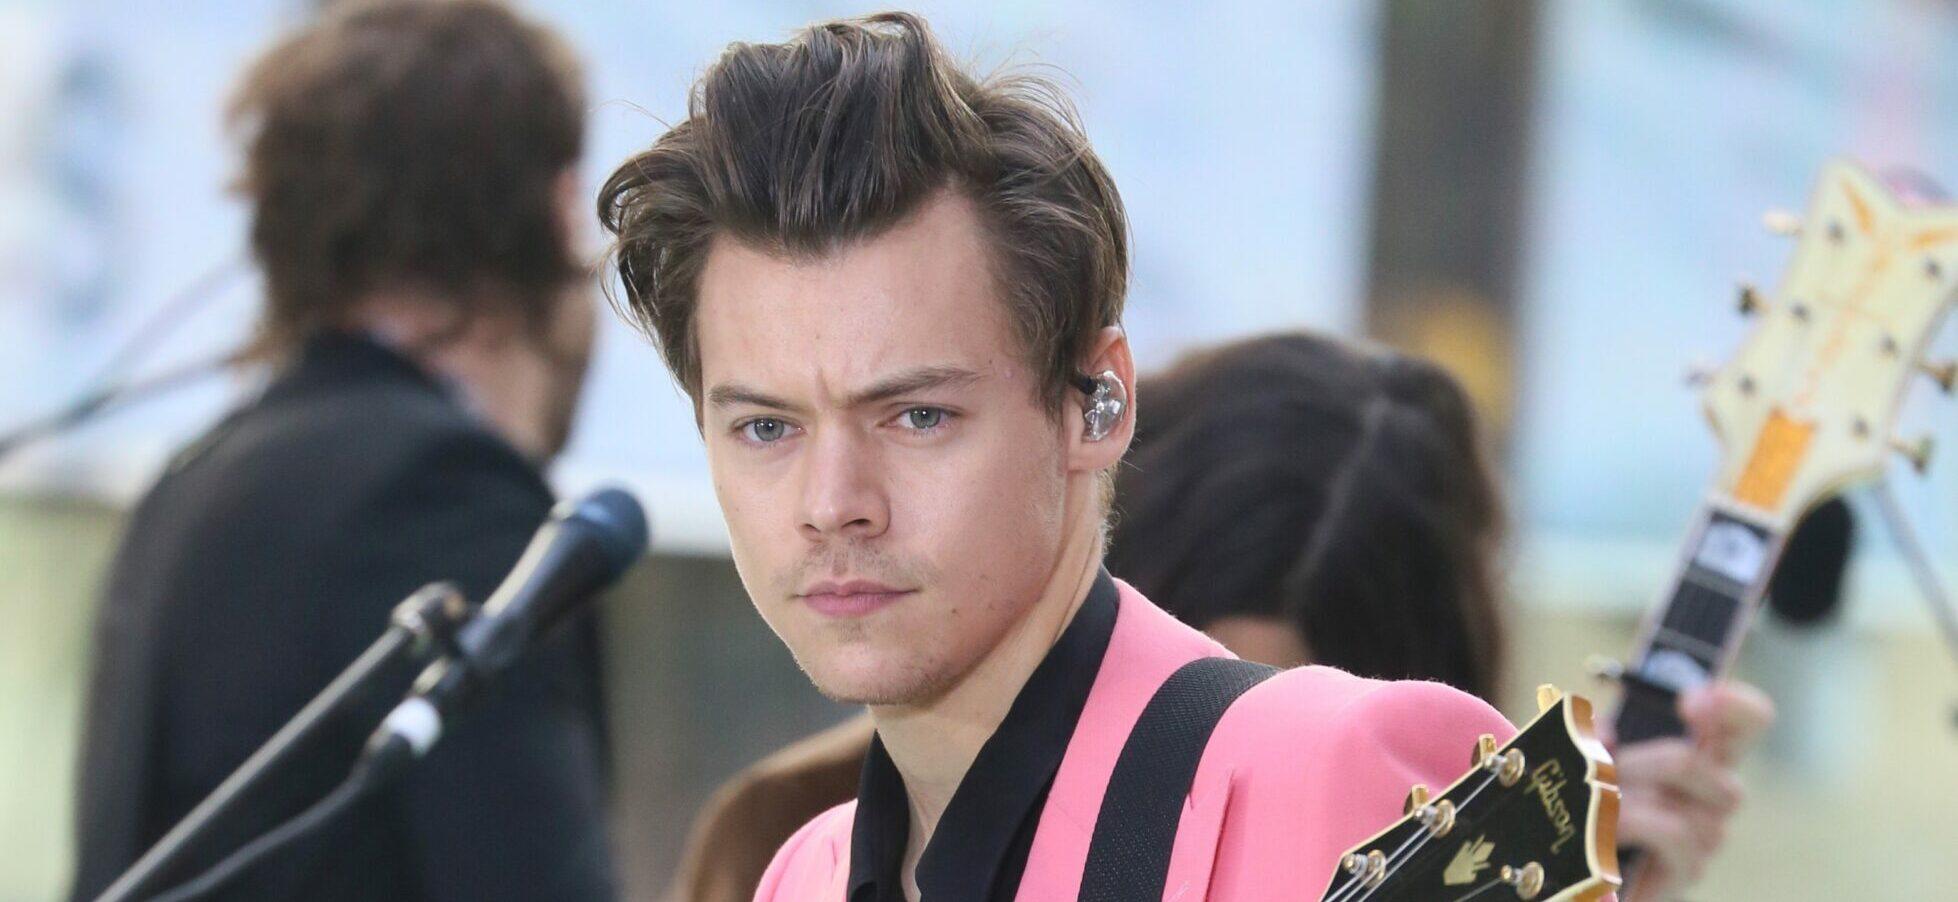 Harry Styles Will Be Available For You To Study In University, Here’s How!